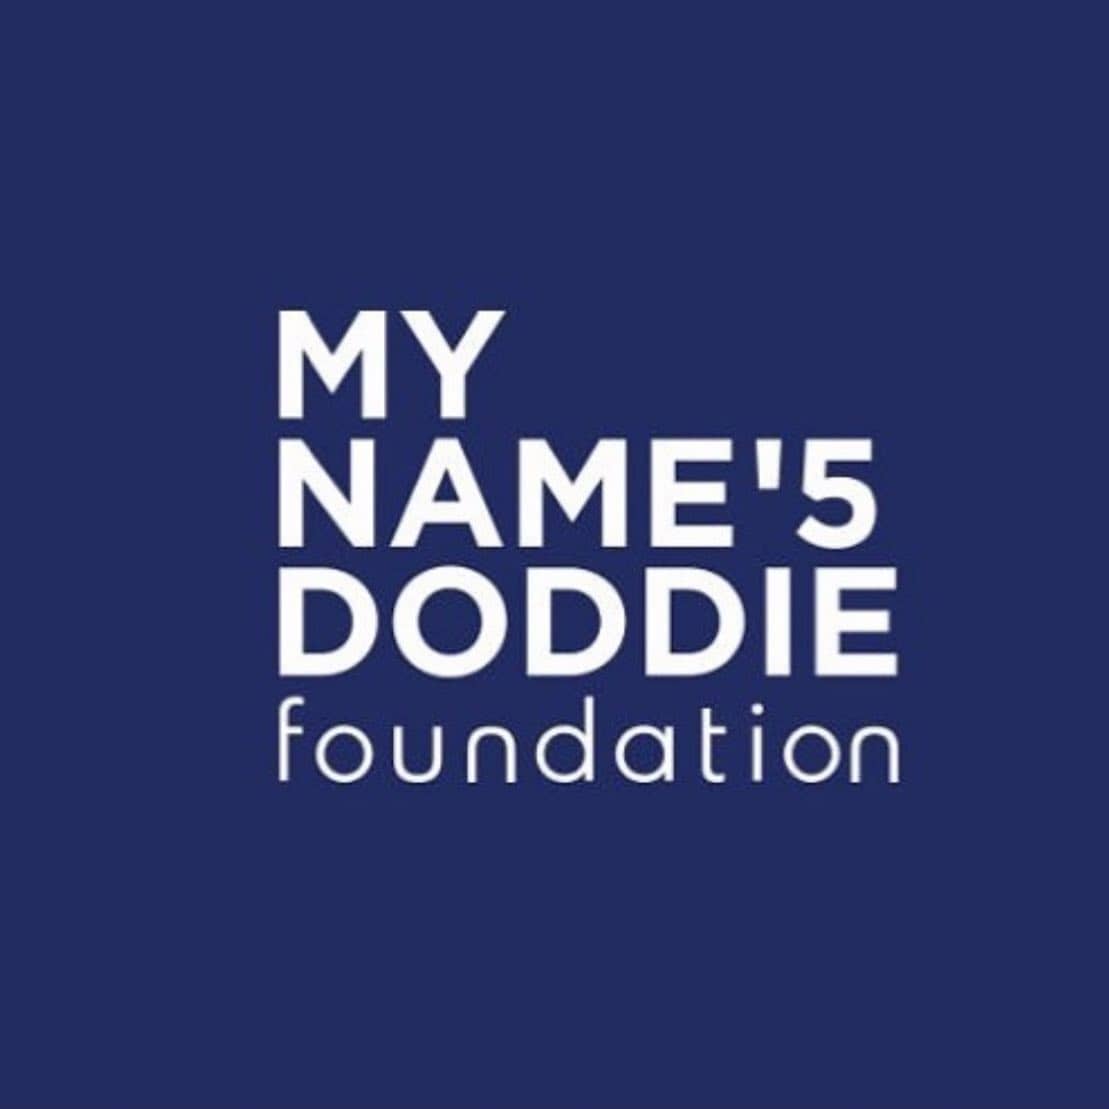 This Charity Tuesday we're celebrating @myname5doddie who are joining the Peak District Challenge...